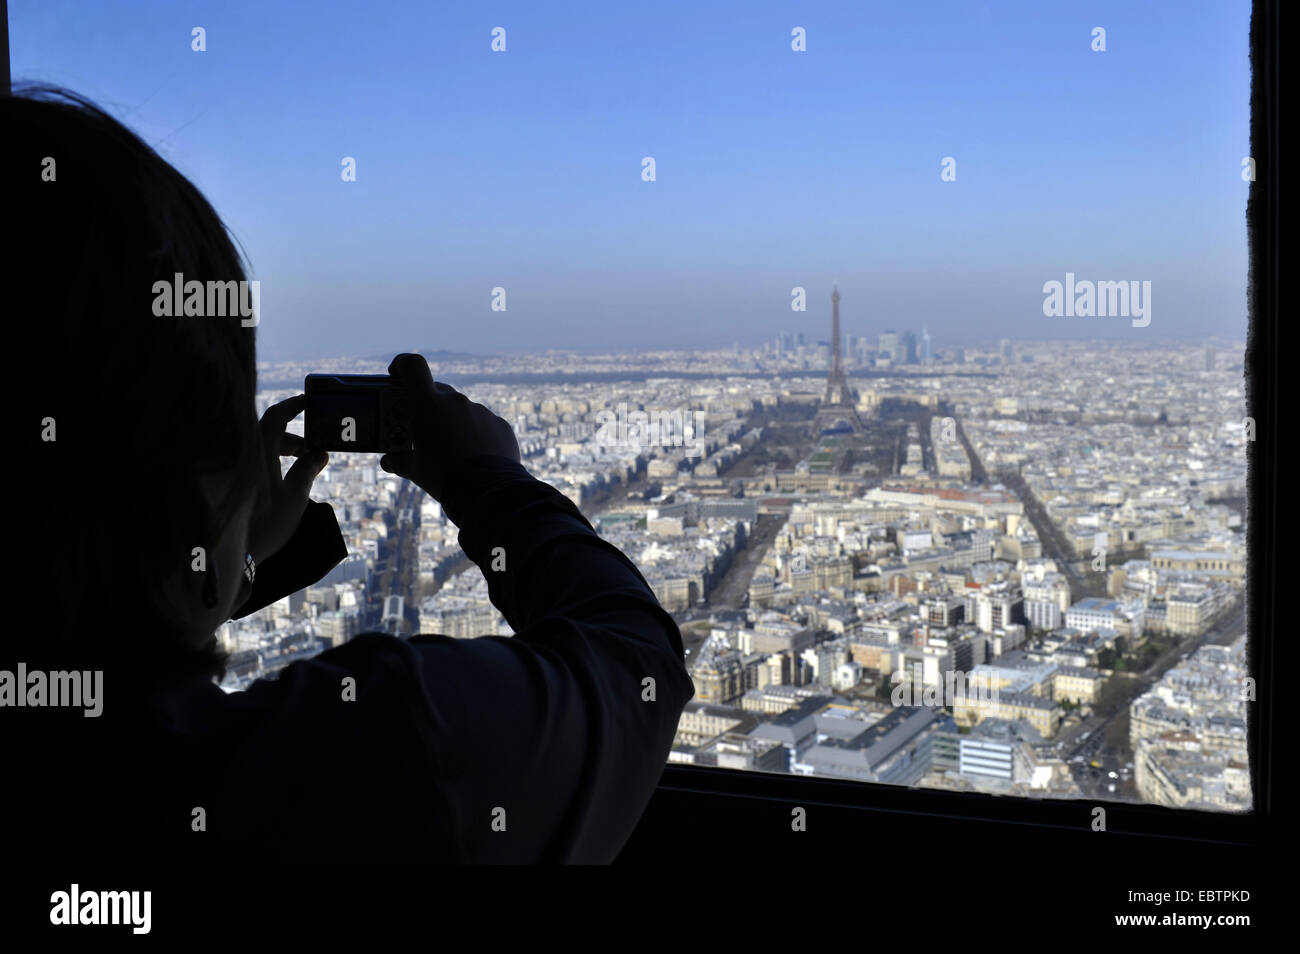 tourist taking a photo of the view from the Tour Montparnasse over the sea of houses of the city with the Eiffel Tower in the centre, France, Paris Stock Photo